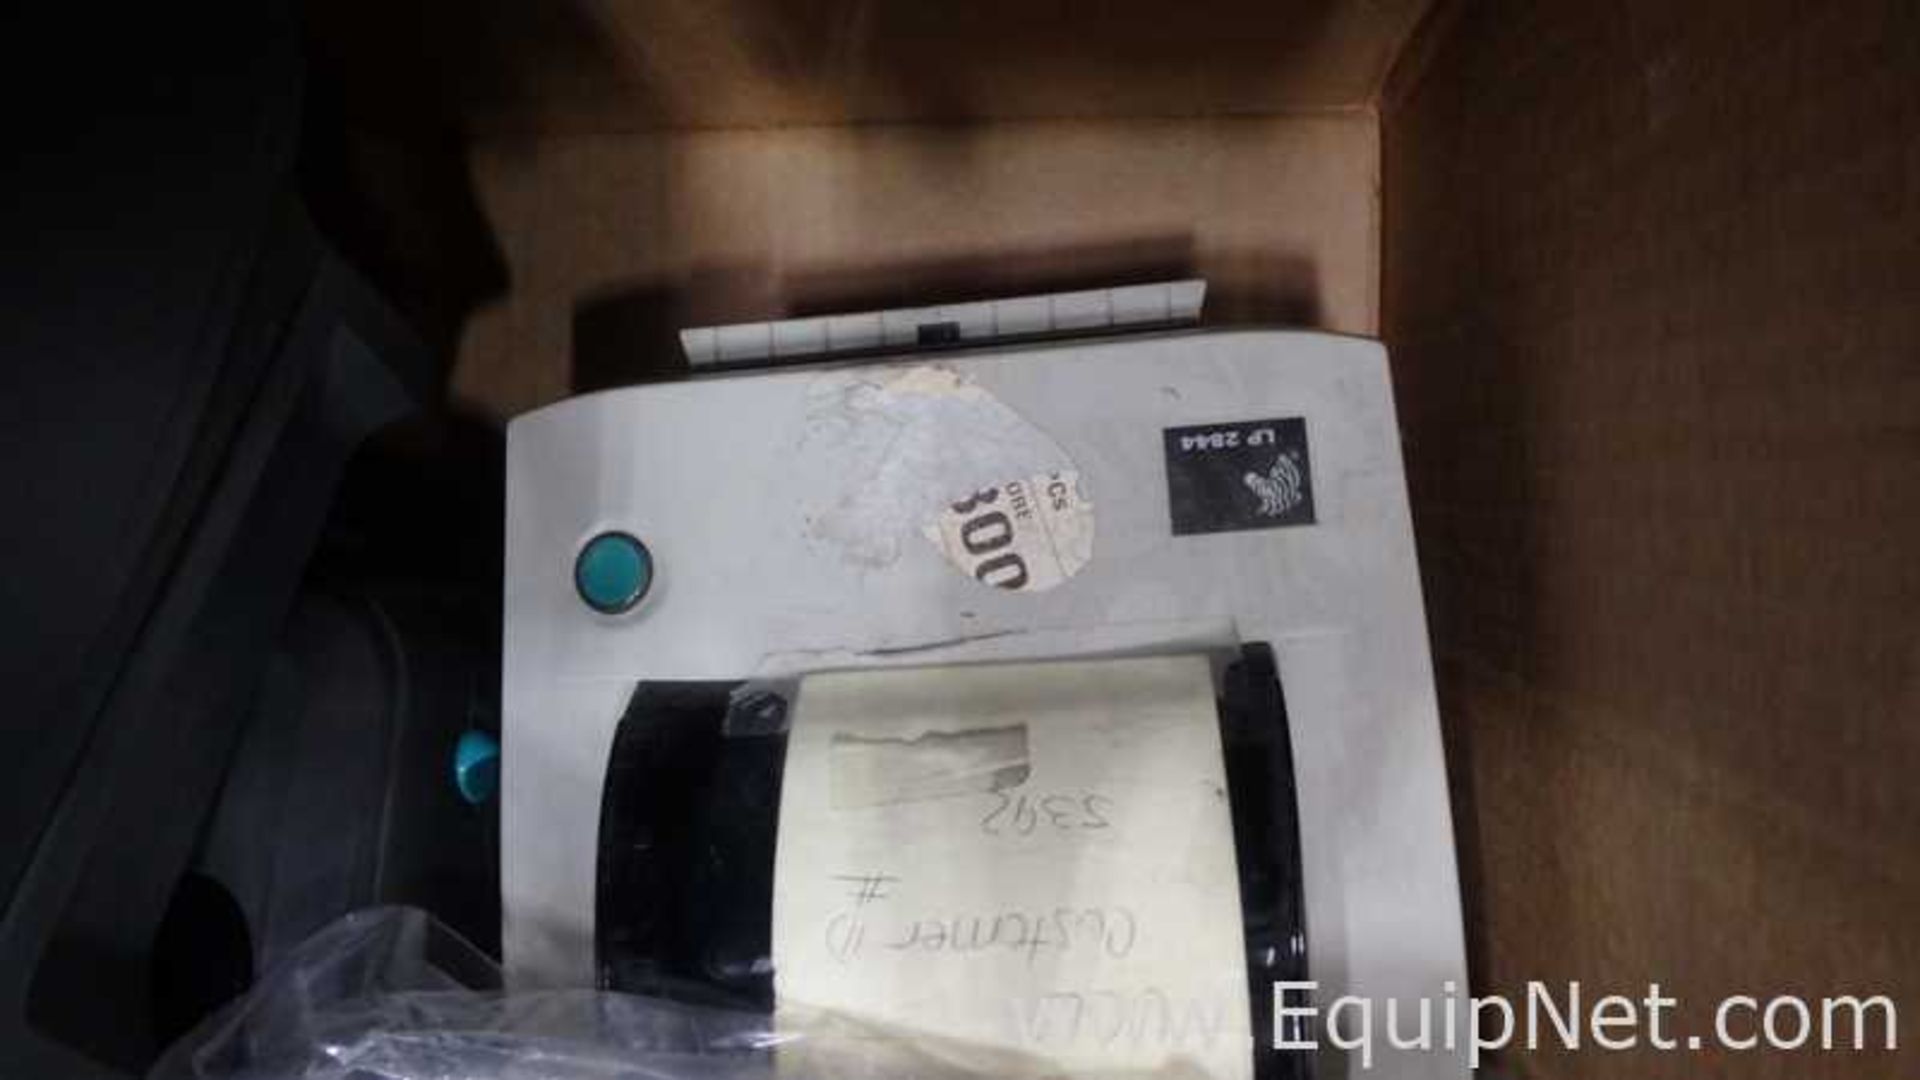 Lot of 13 Assorted Zebra Technologies Printers ZP505,ZXP Series 3,ZP450 and LP2844 Barcode Printers - Image 5 of 8